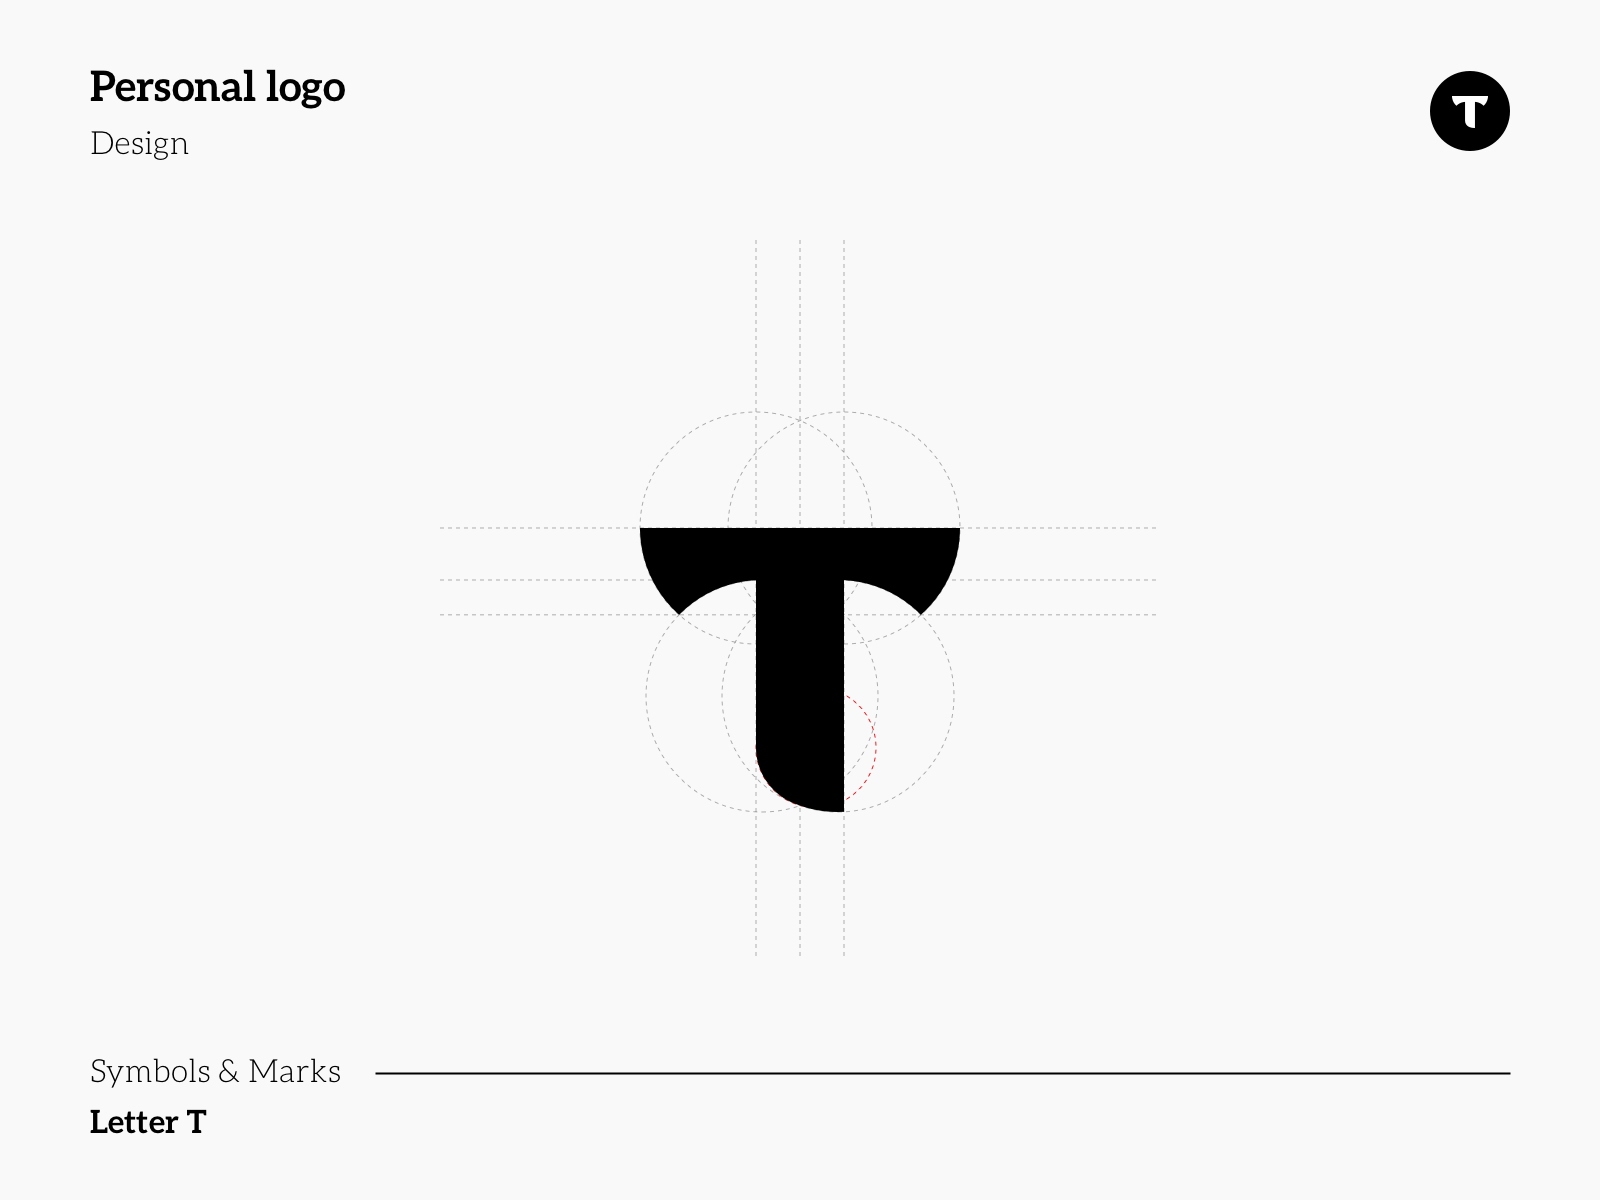 Personal logo by Tim Cao on Dribbble